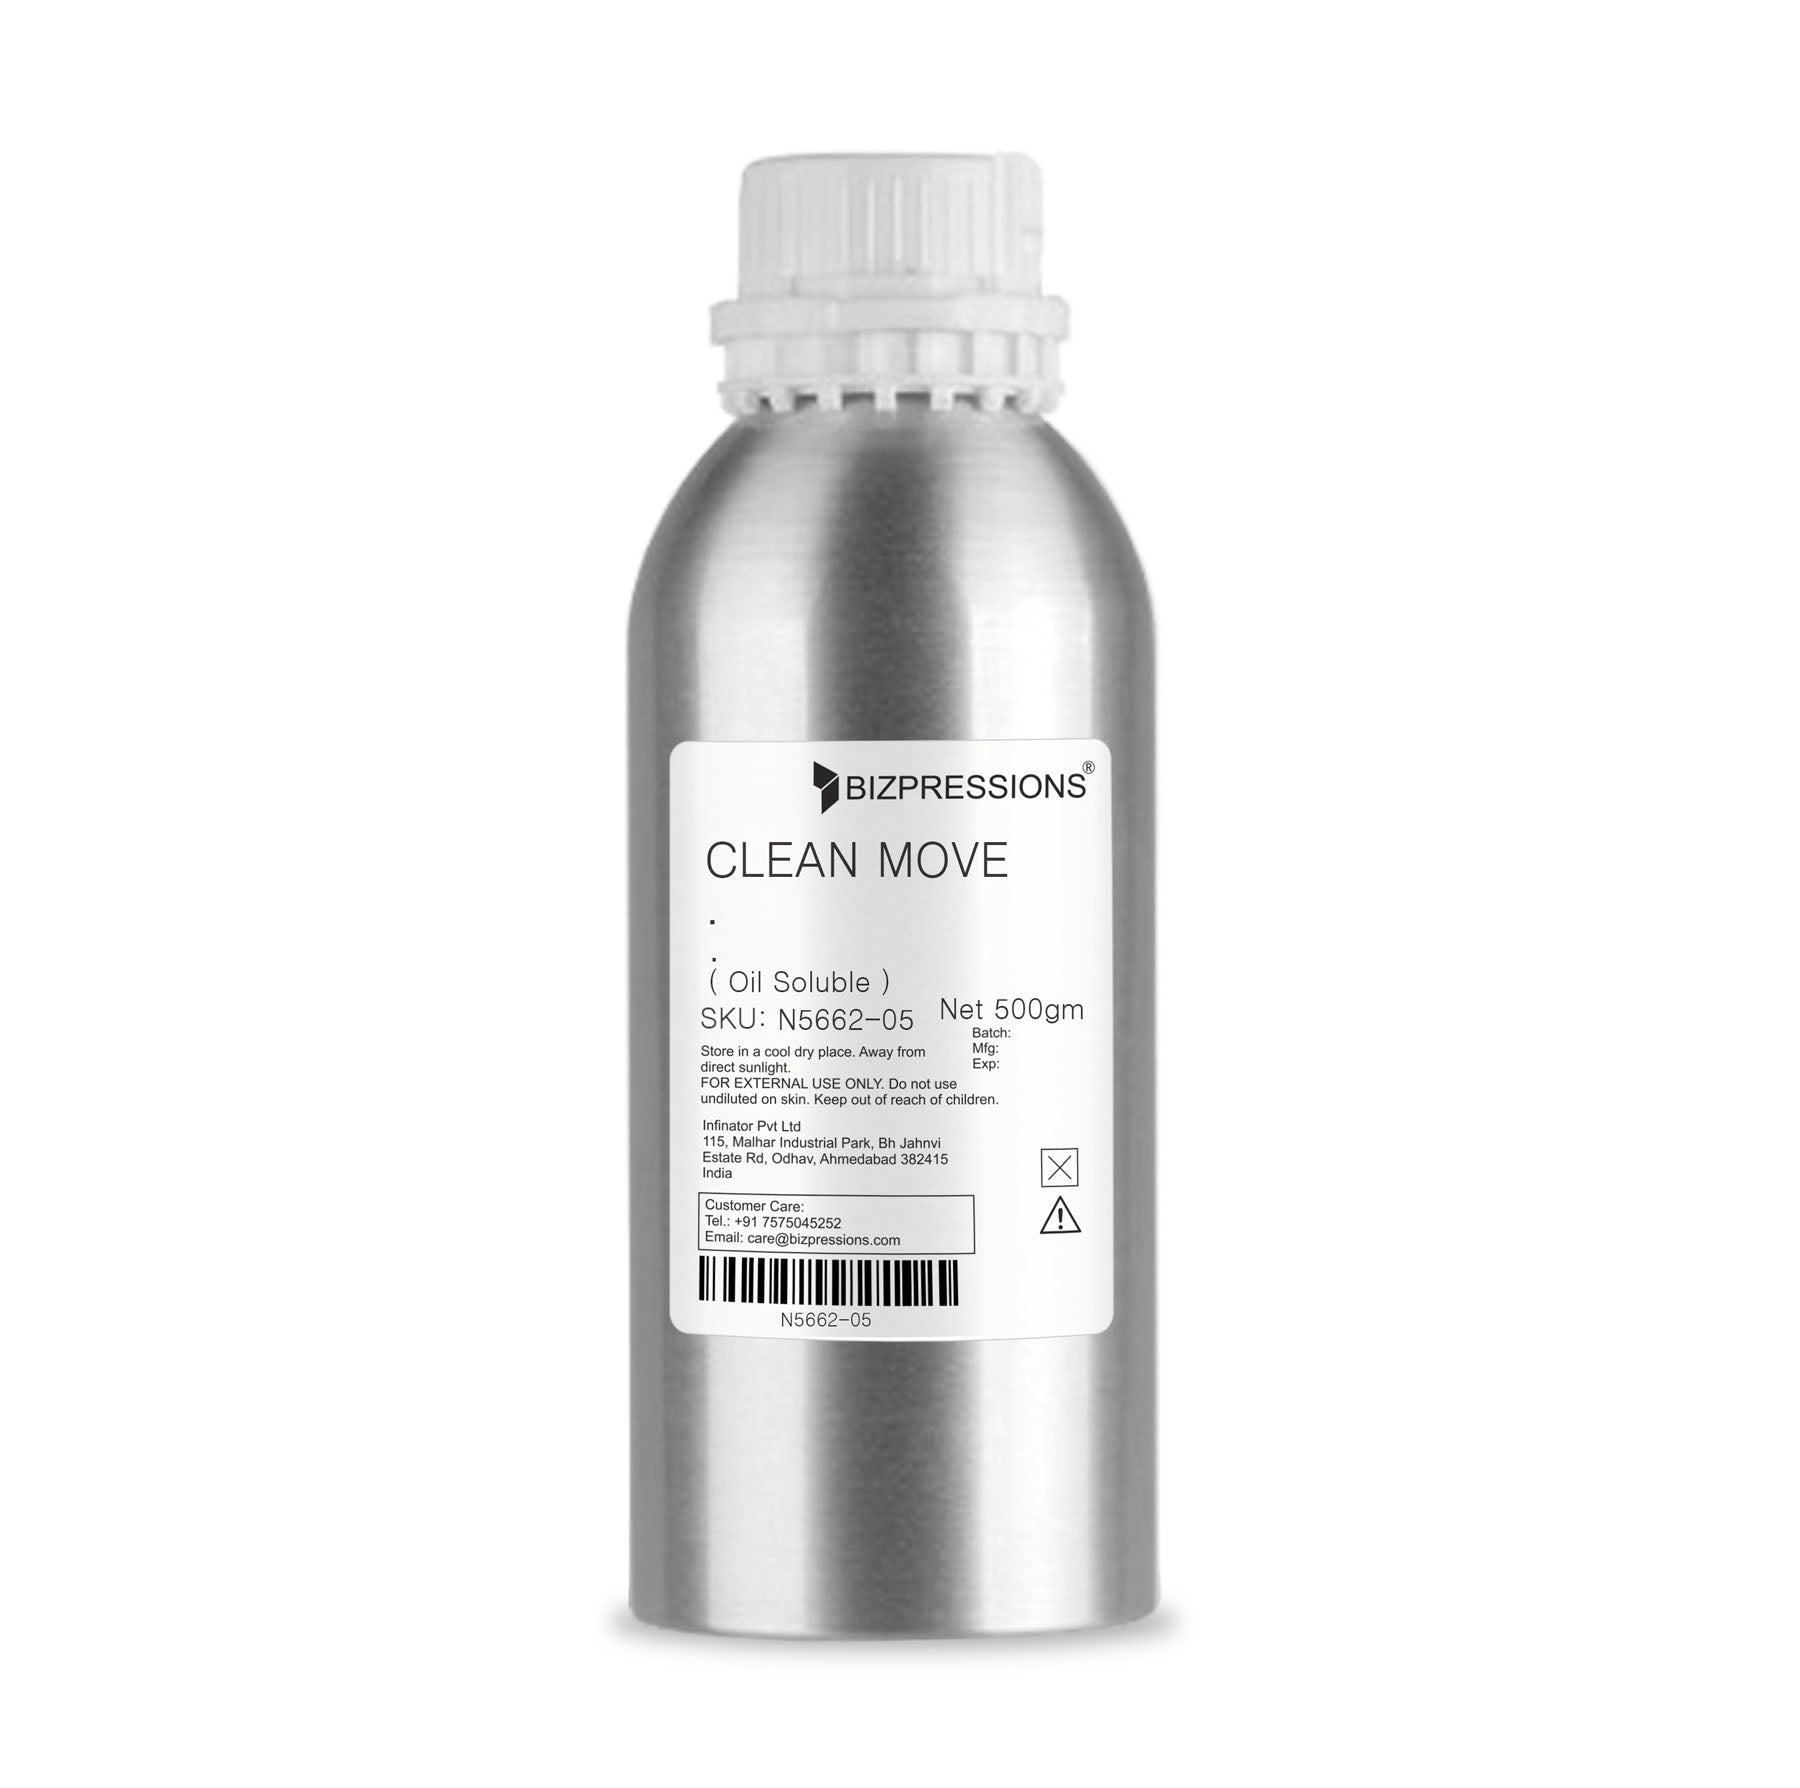 CLEAN MOVE - Fragrance ( Oil Soluble ) - 500 gm